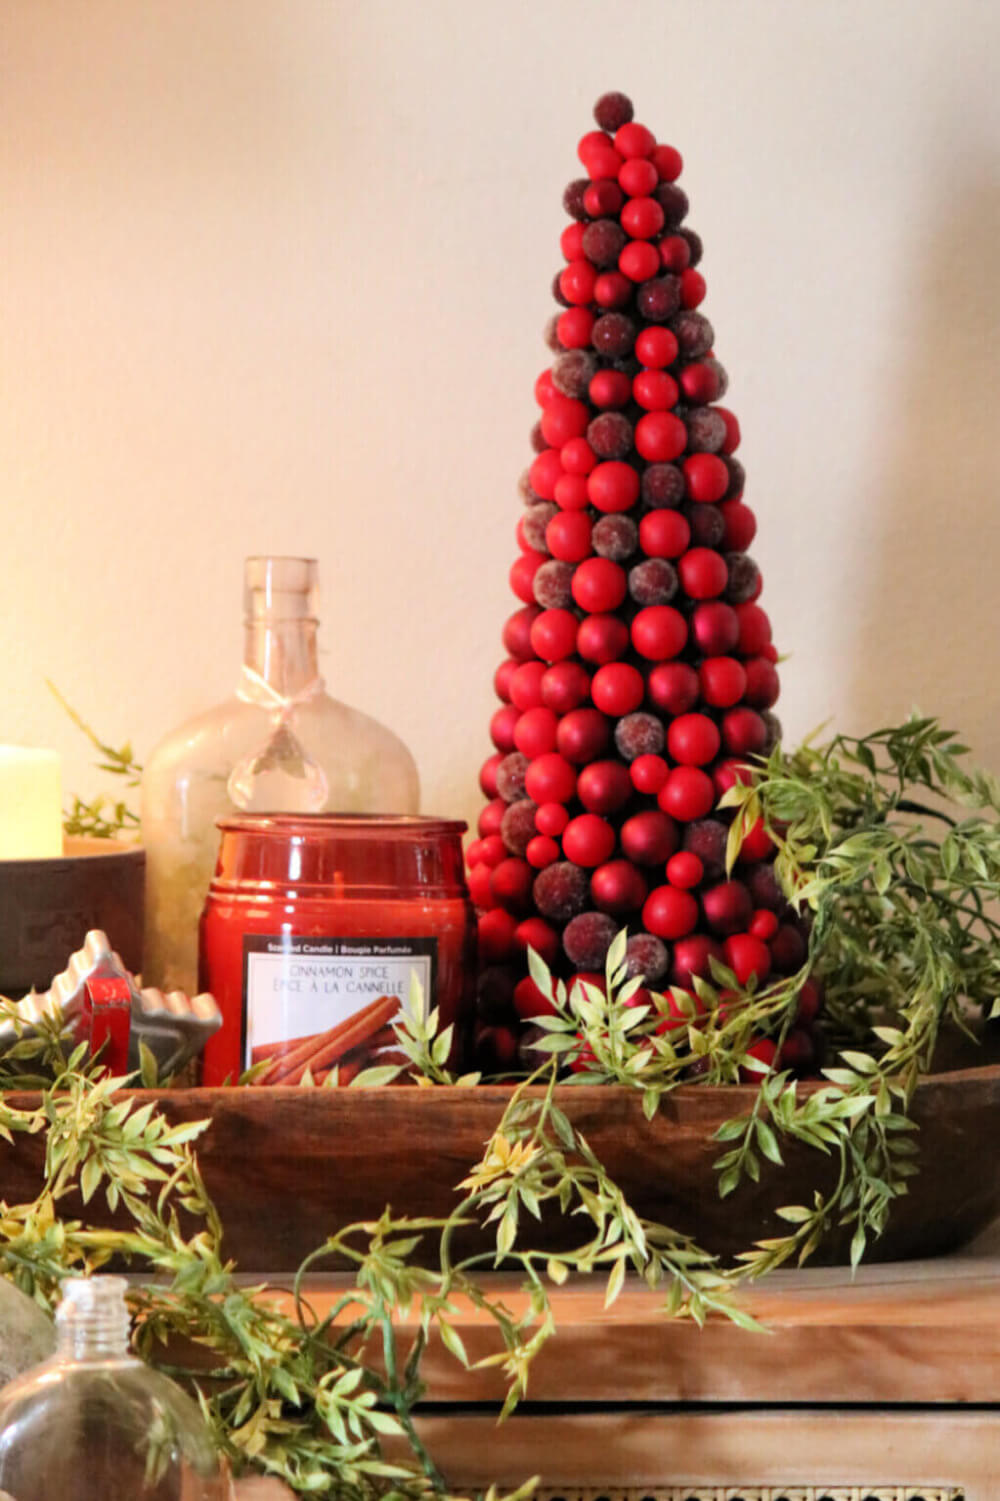 In my small space holiday trees, this is my little red tree with a candle and cookie cutter in a dough bowl.